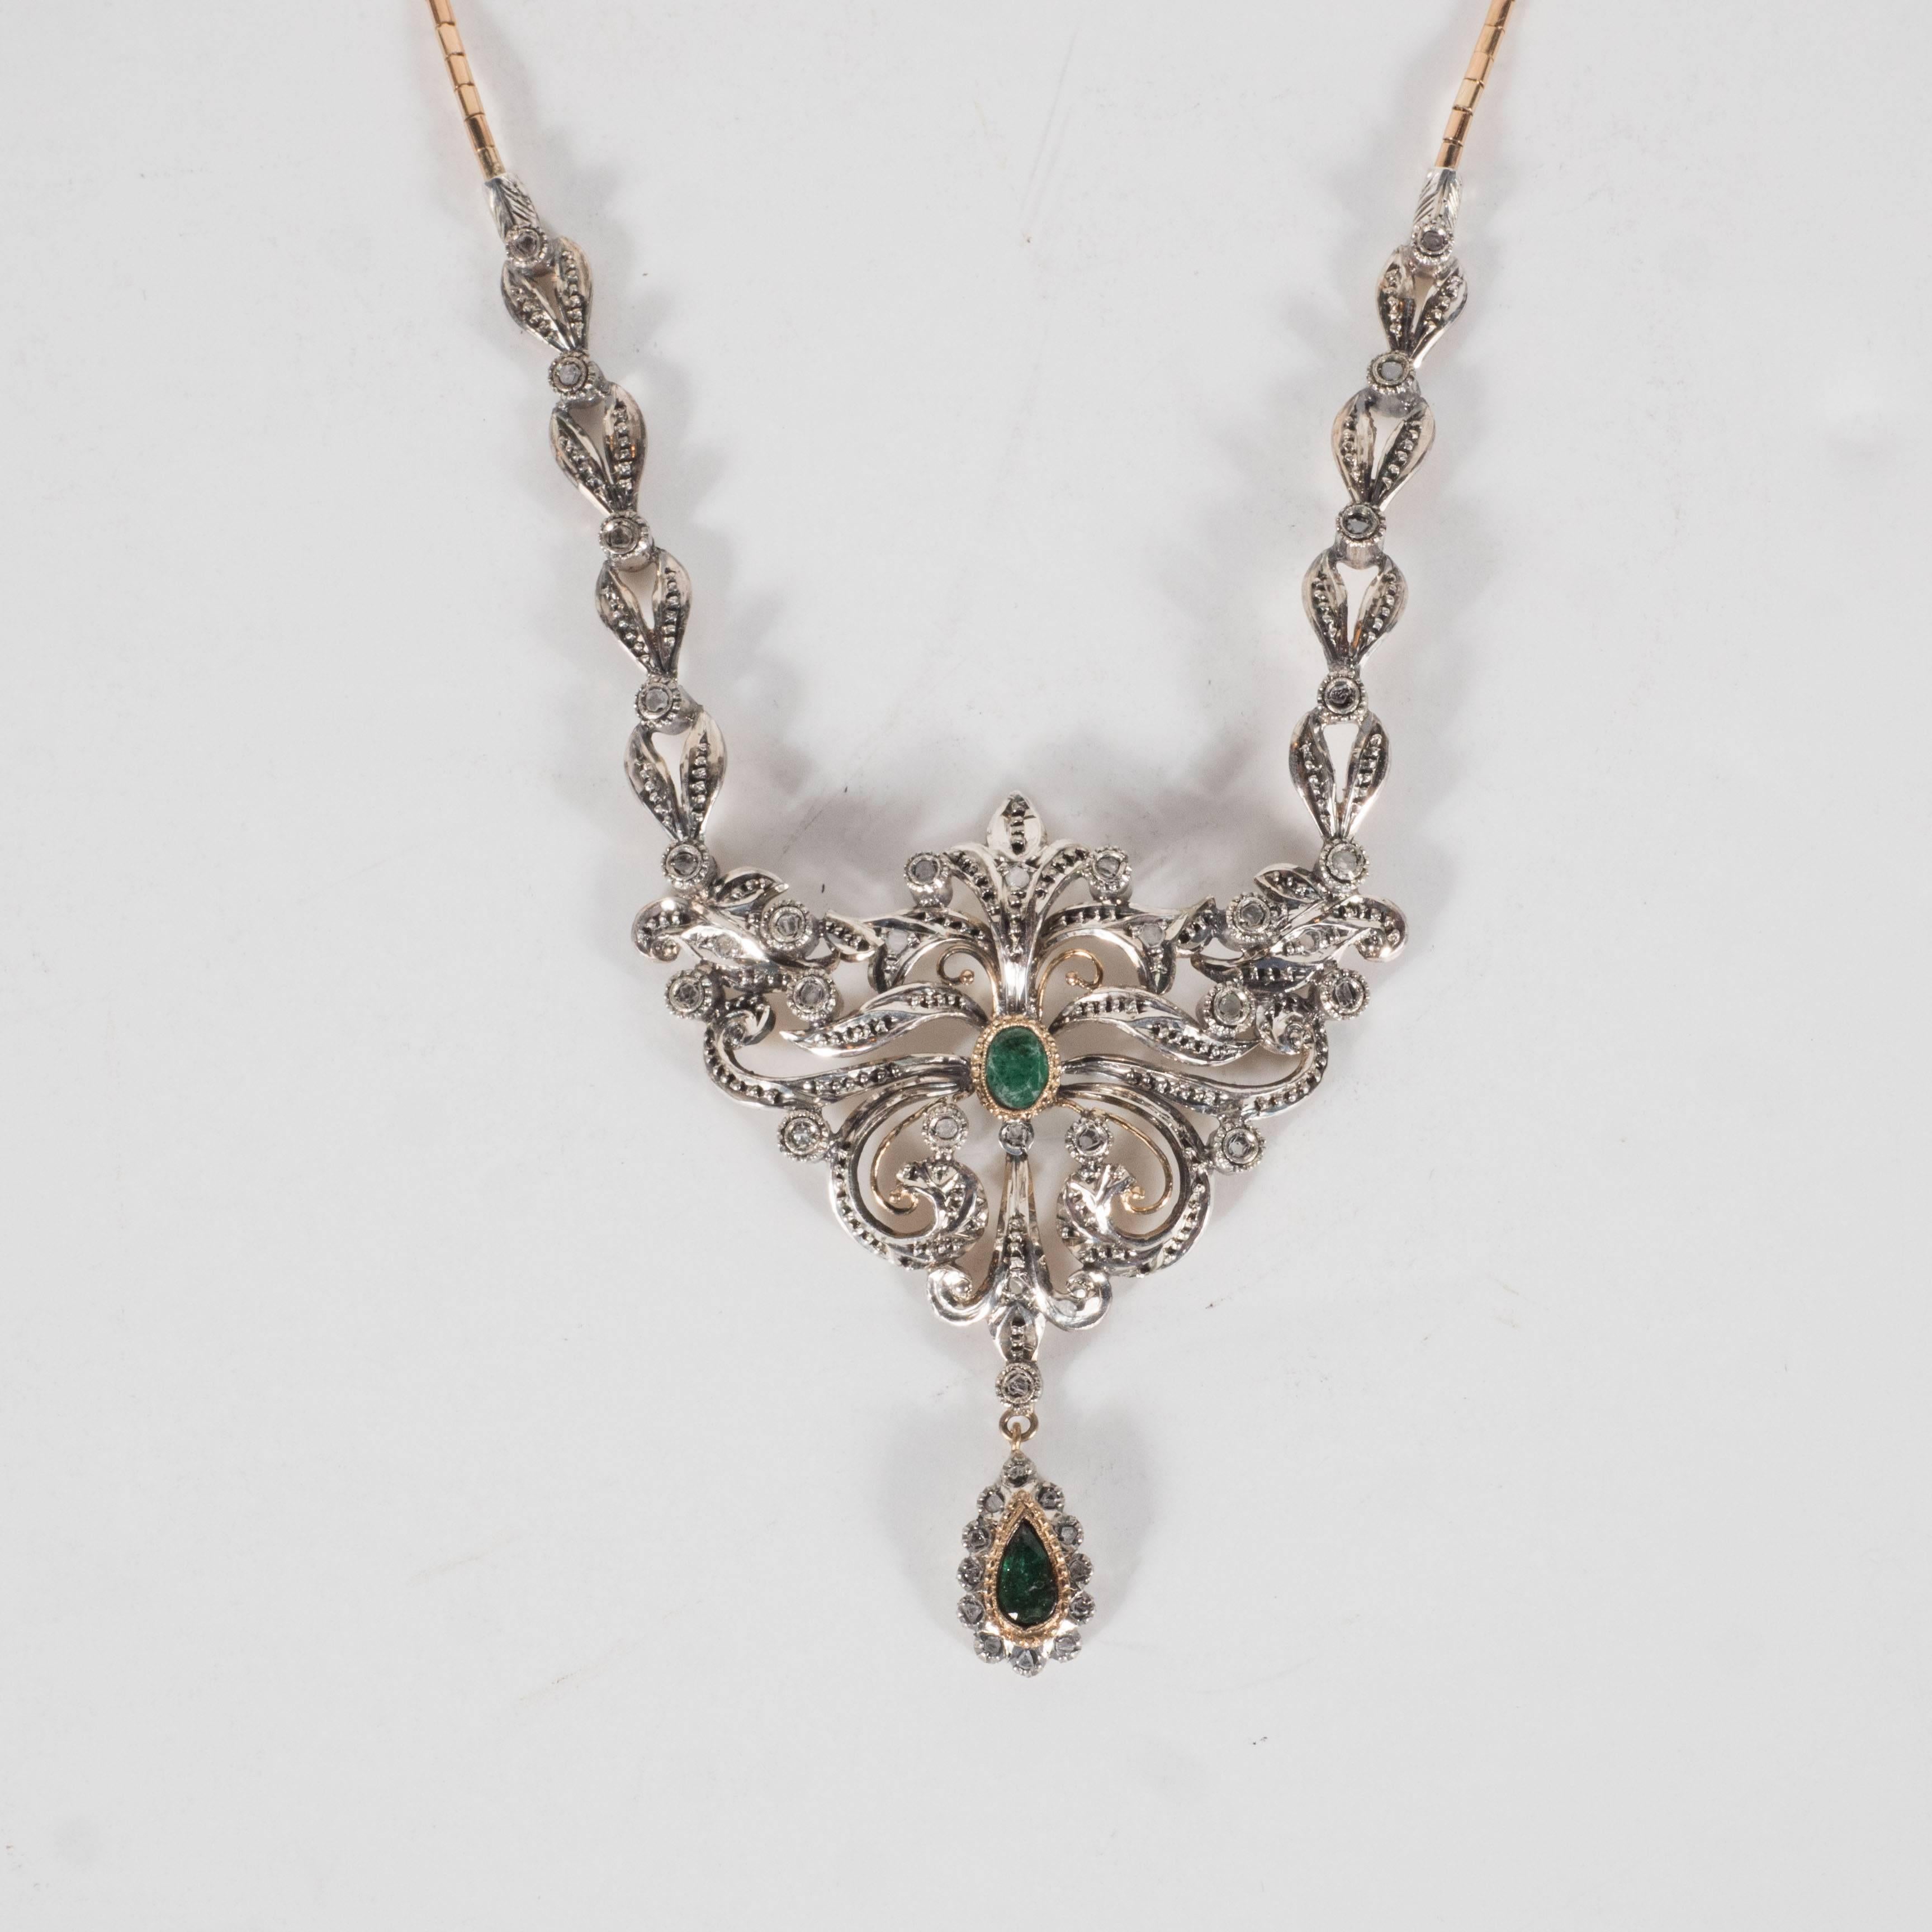 This Edwardian suite of Jewelry consists of a Necklace ,earrings, ring and bracelet . They are made of sterling silver and 18k yellow gold all set with diamonds and emeralds.They are of a stylized floral and foliate design.The necklace measures 16